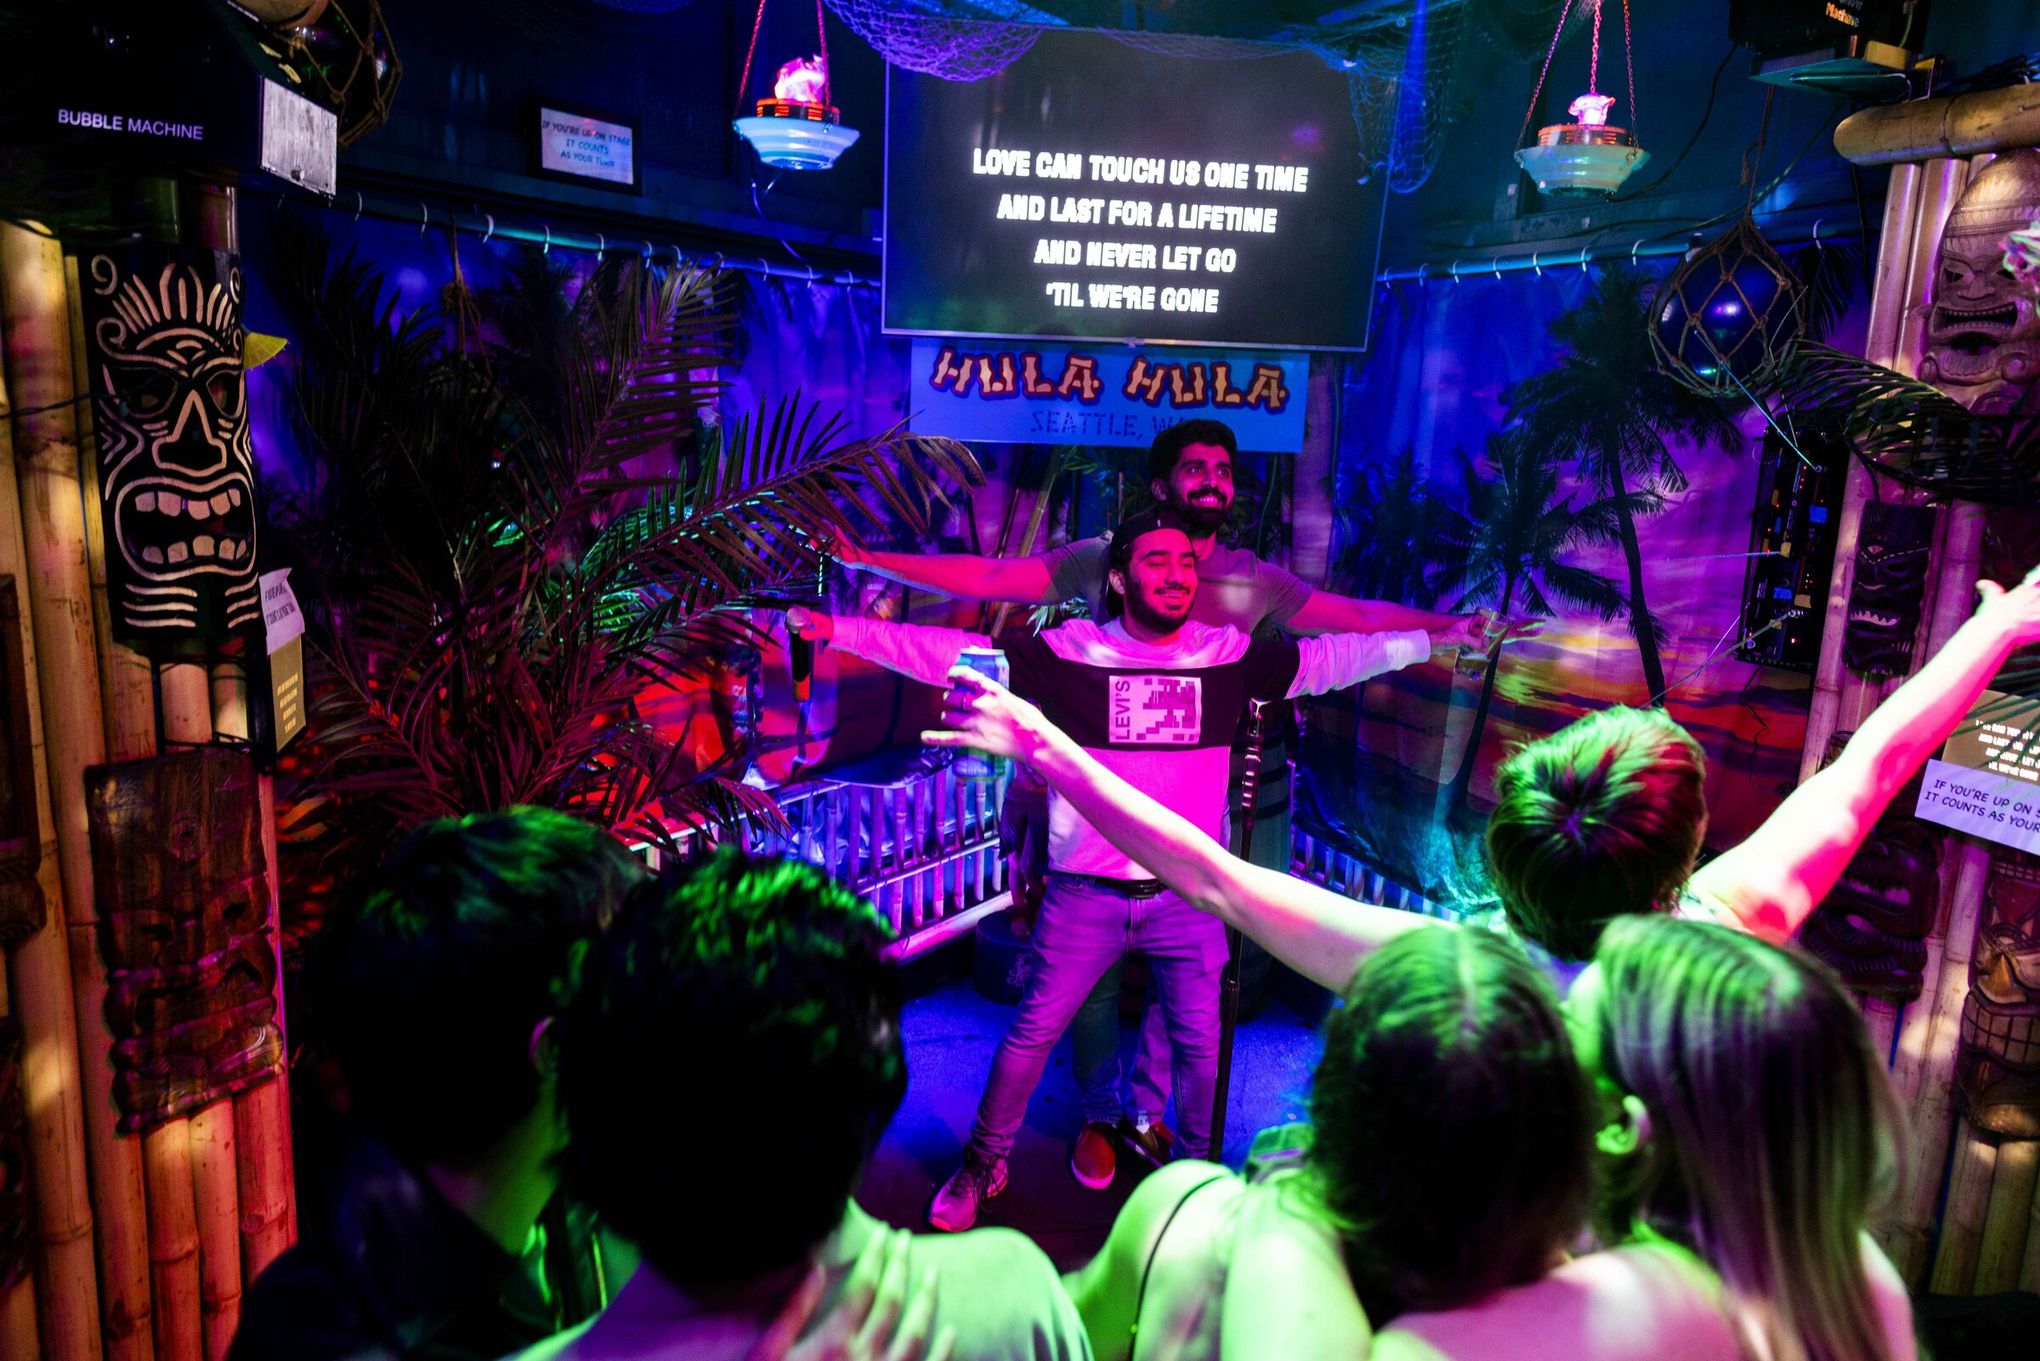 We want to hear where you sing karaoke in Seattle | The Seattle Times